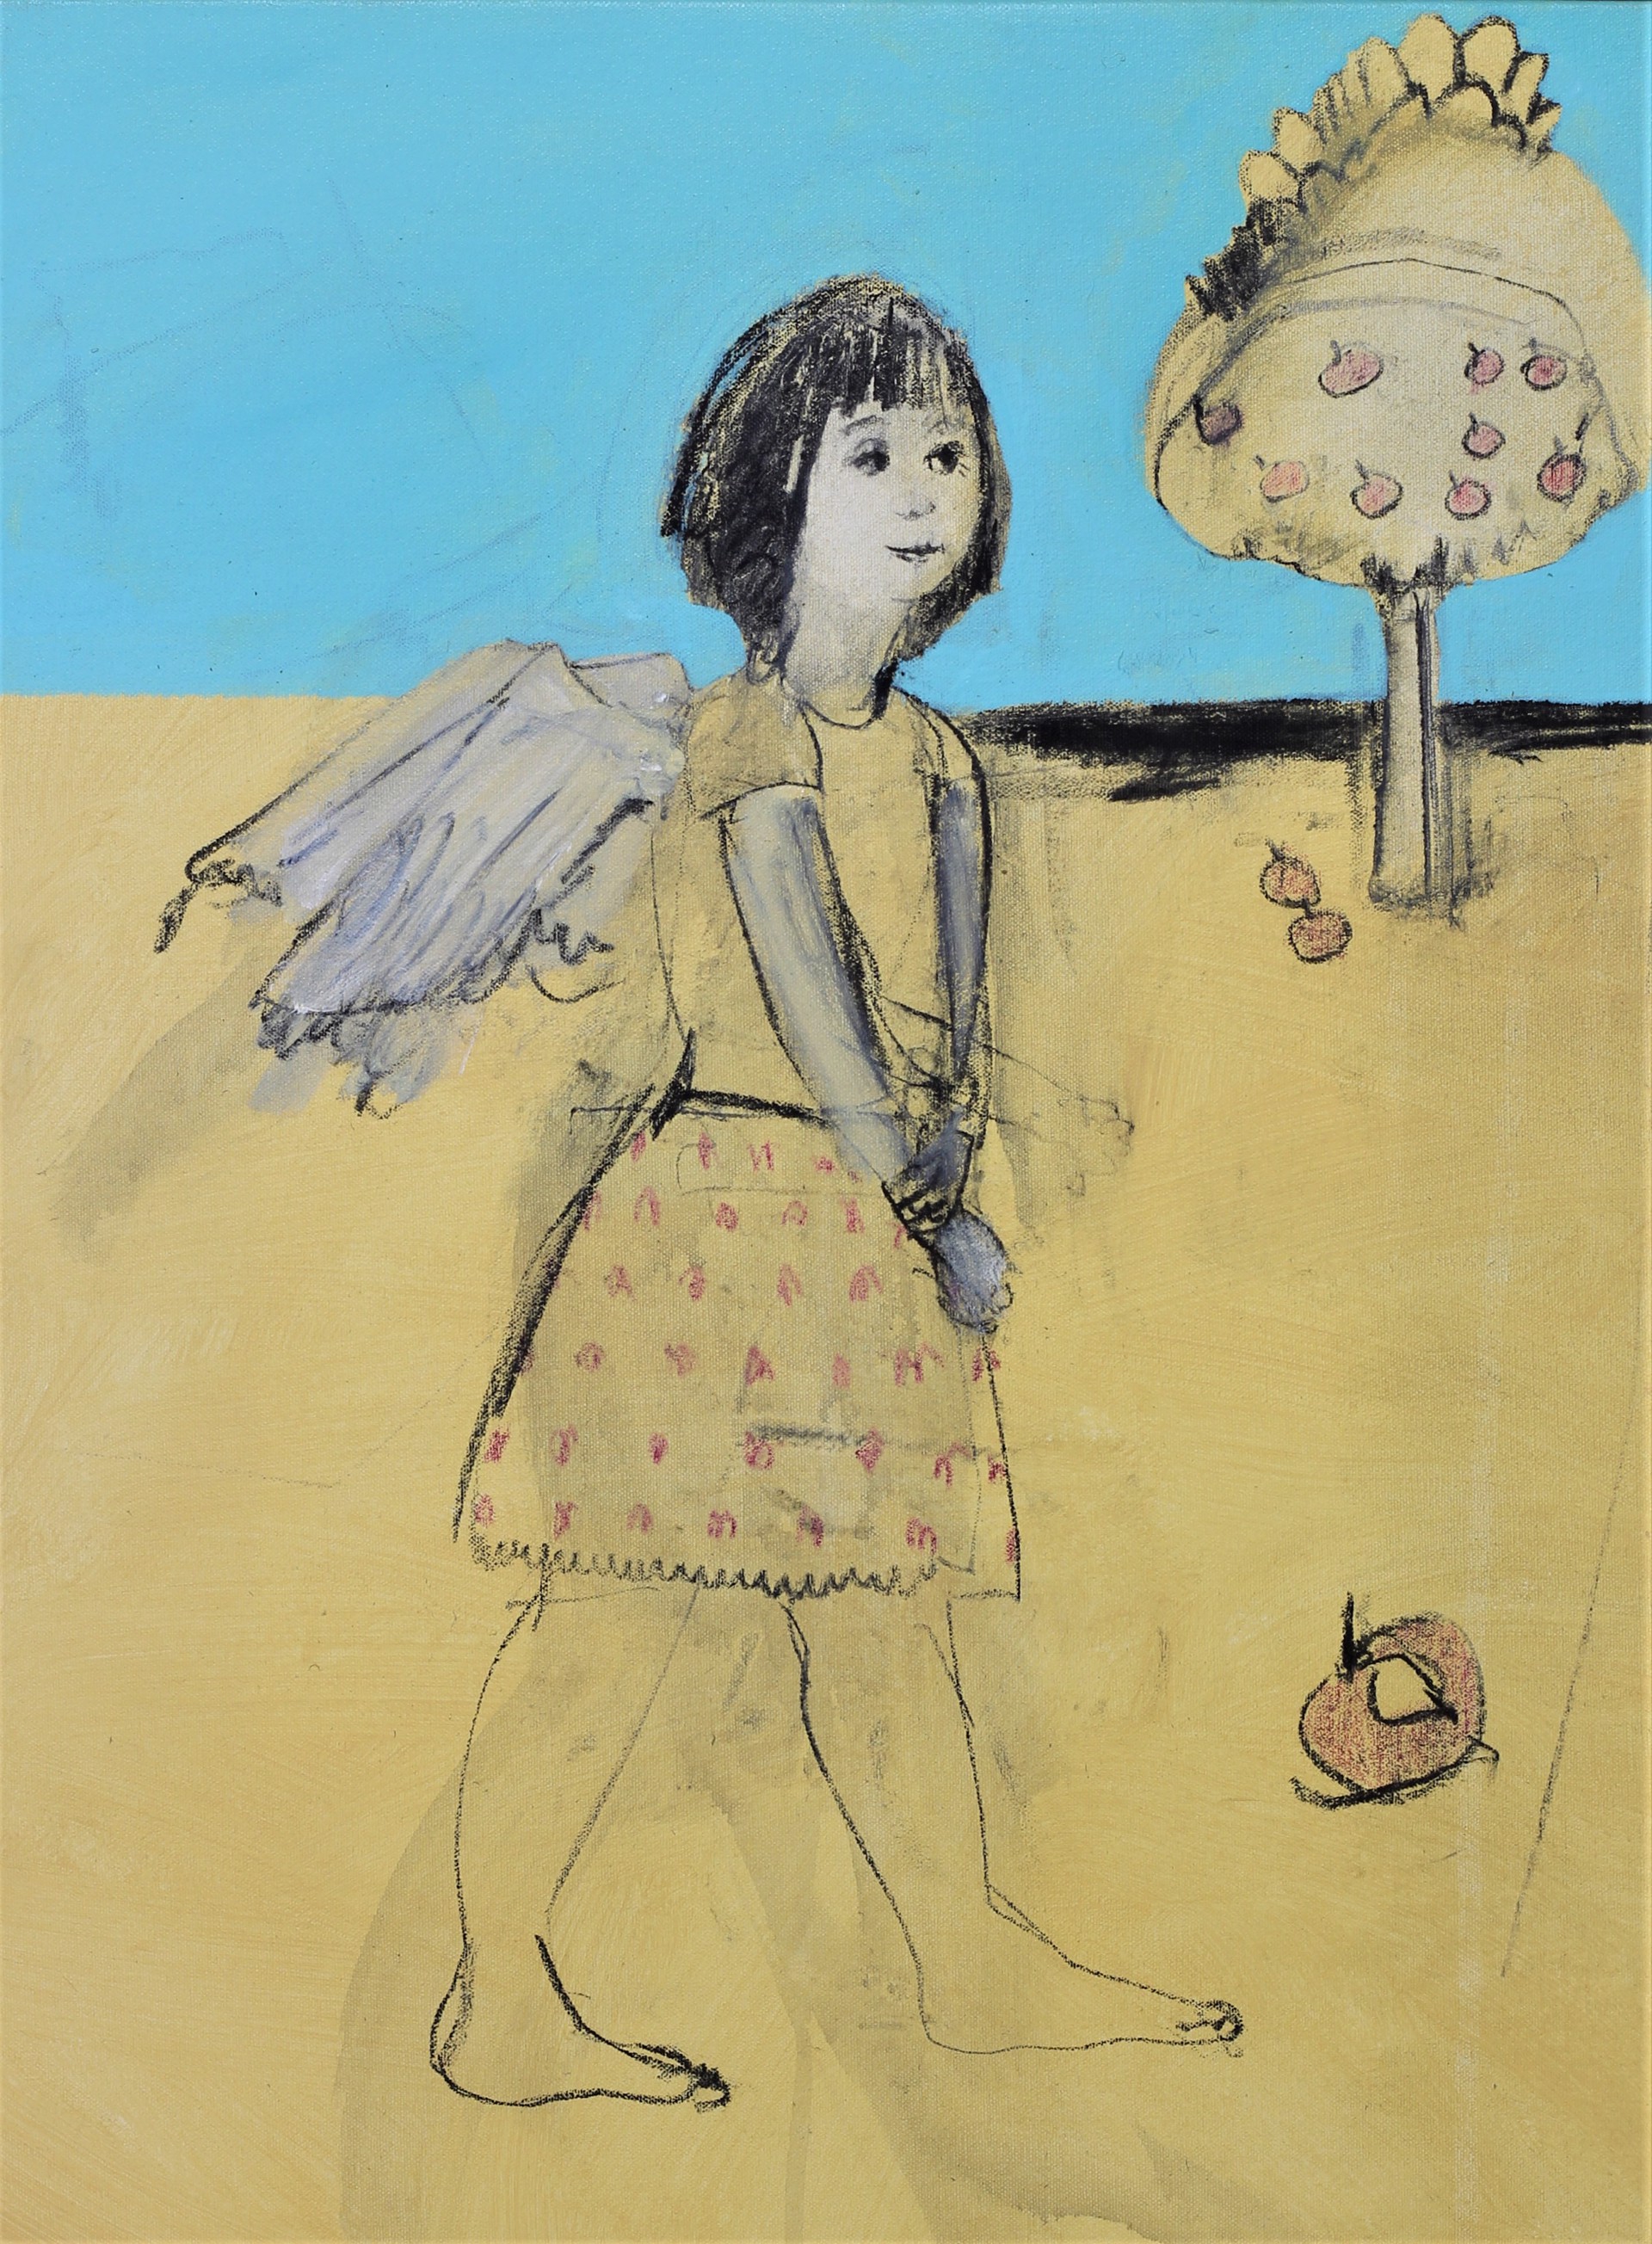 GIVE YOUR ANGEL A HAND by CHRISTINA THWAITES (Figures)